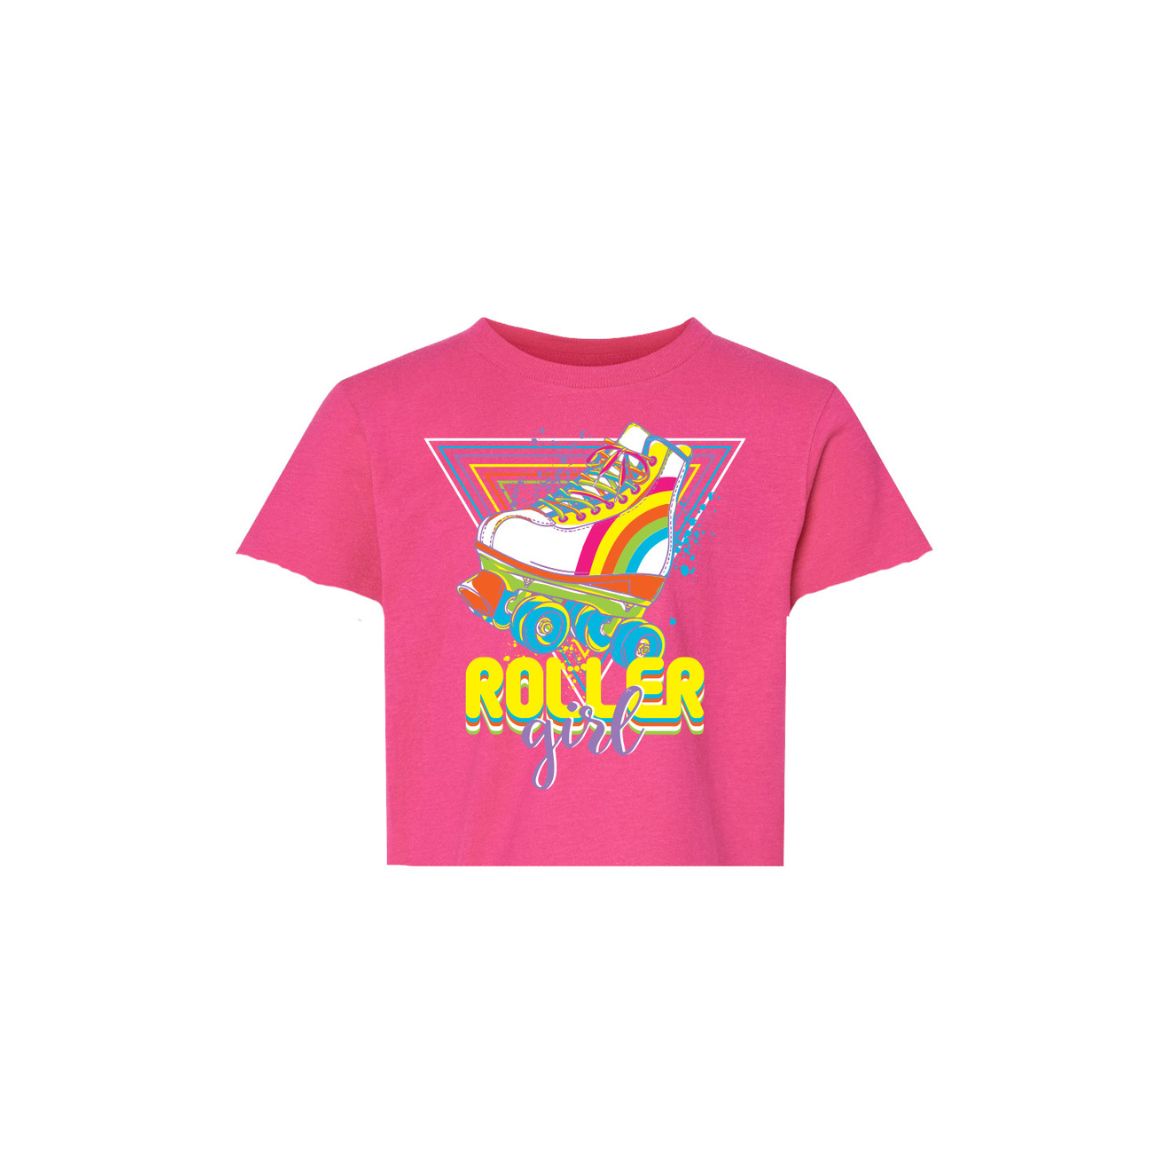 Roller Girl on Hot Pink Vintage Cut Boxy T' 90S THROW BACK